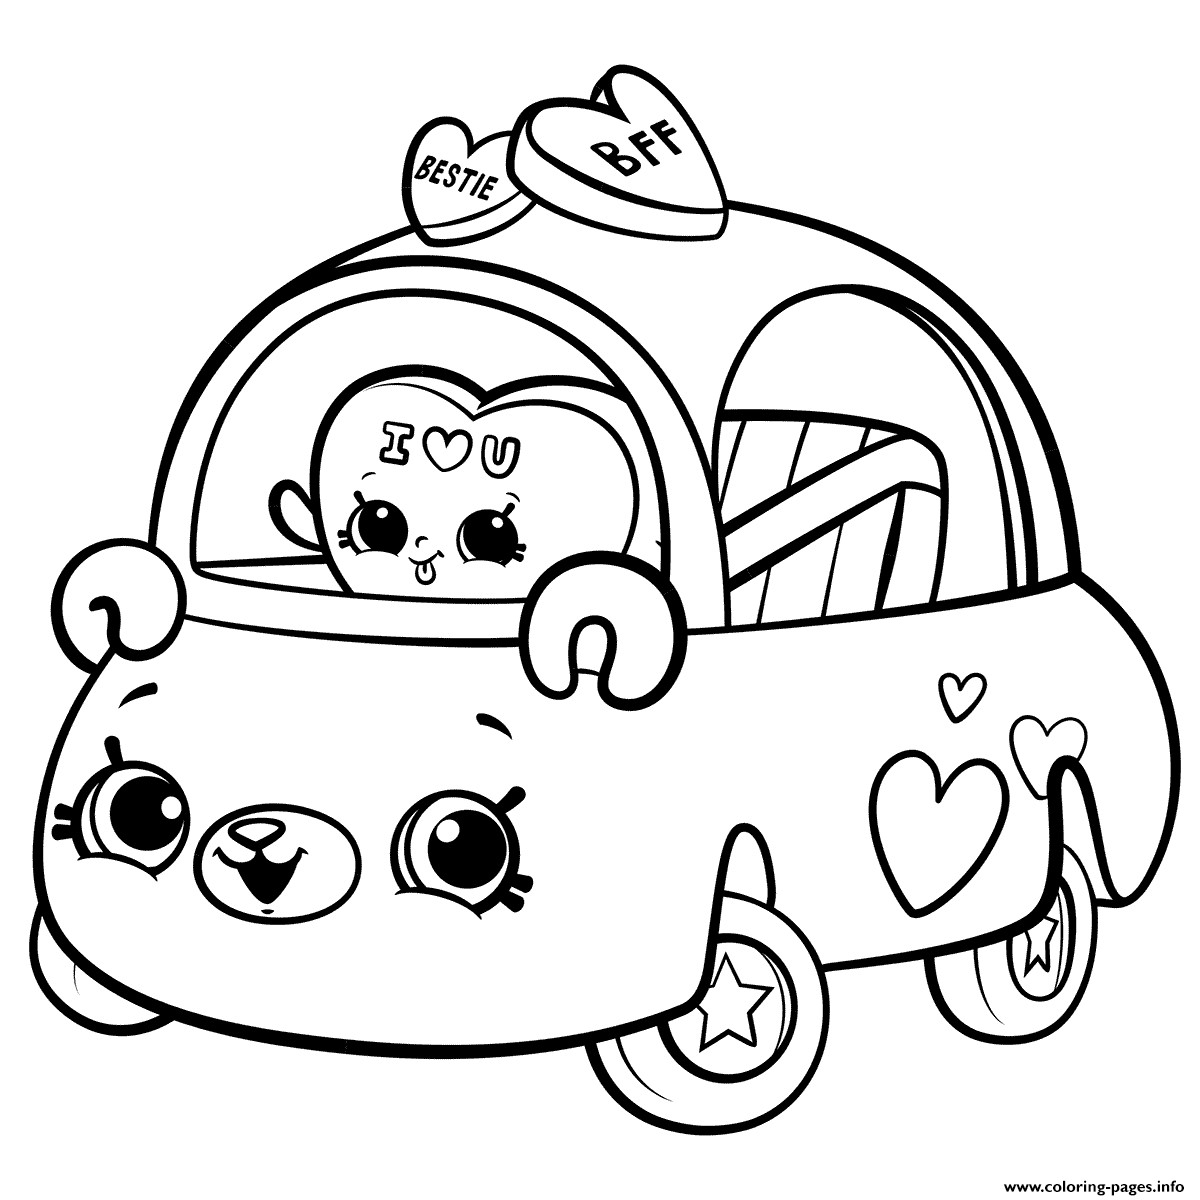 Coloring Pages For Girls Shopkins
 Shopkins Coloring Pages Cutie Cars Chocolate Bar